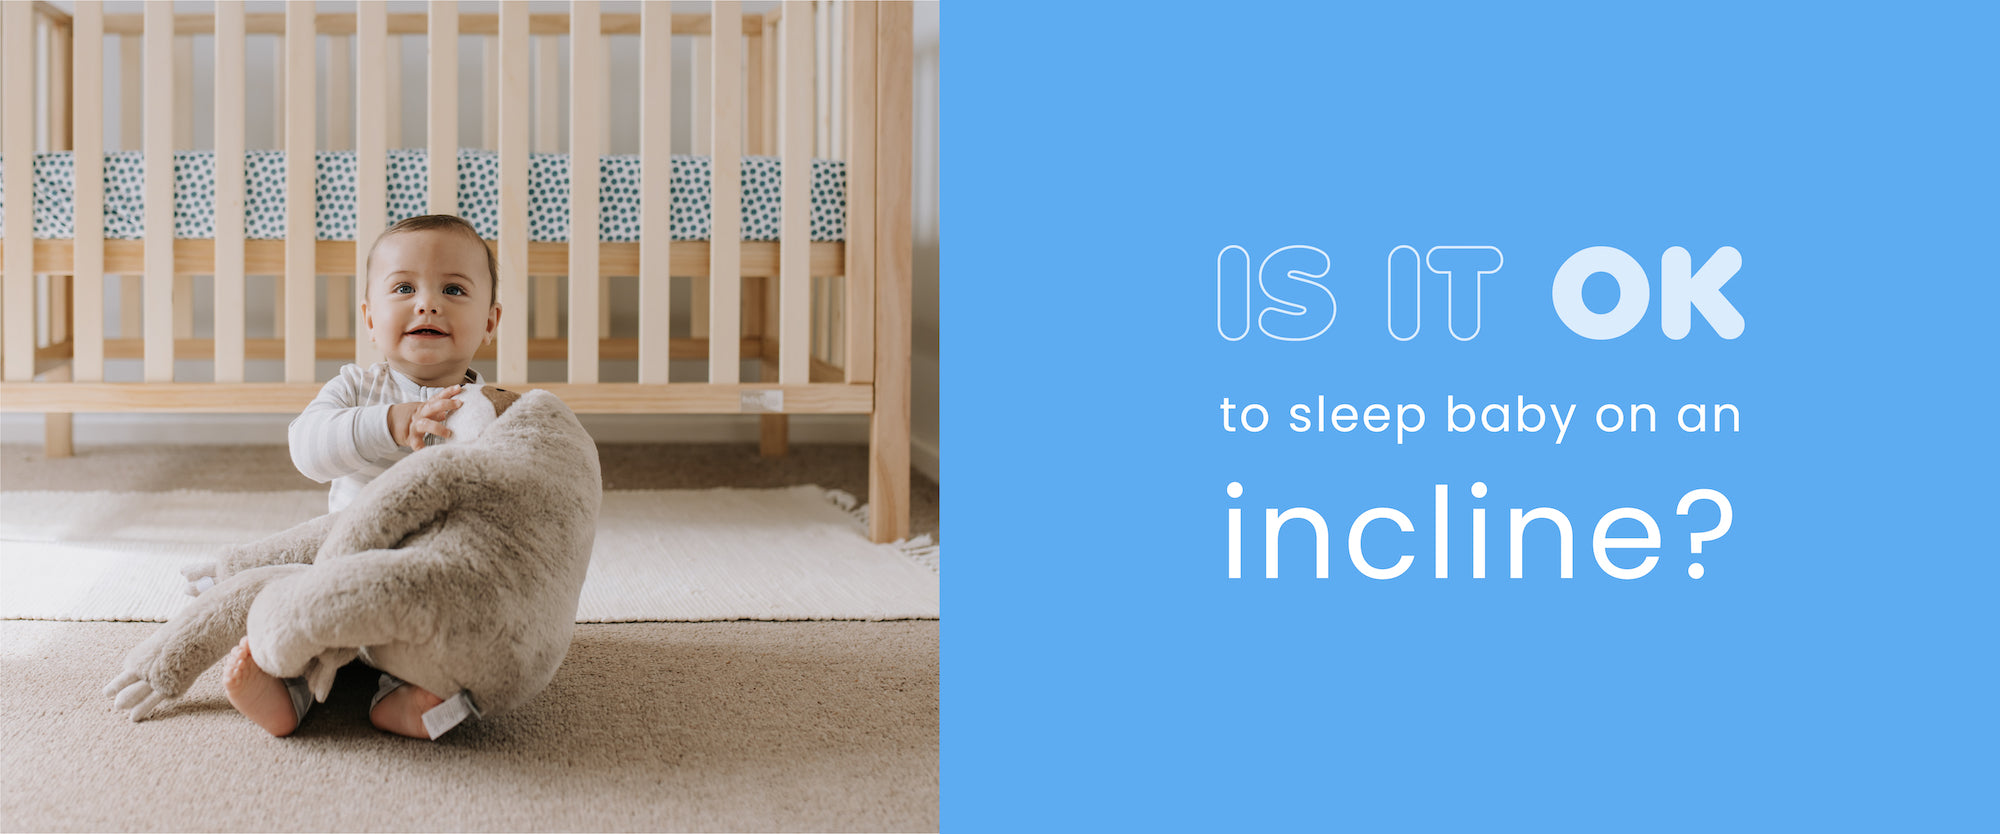 Is it OK to sleep baby on an incline?